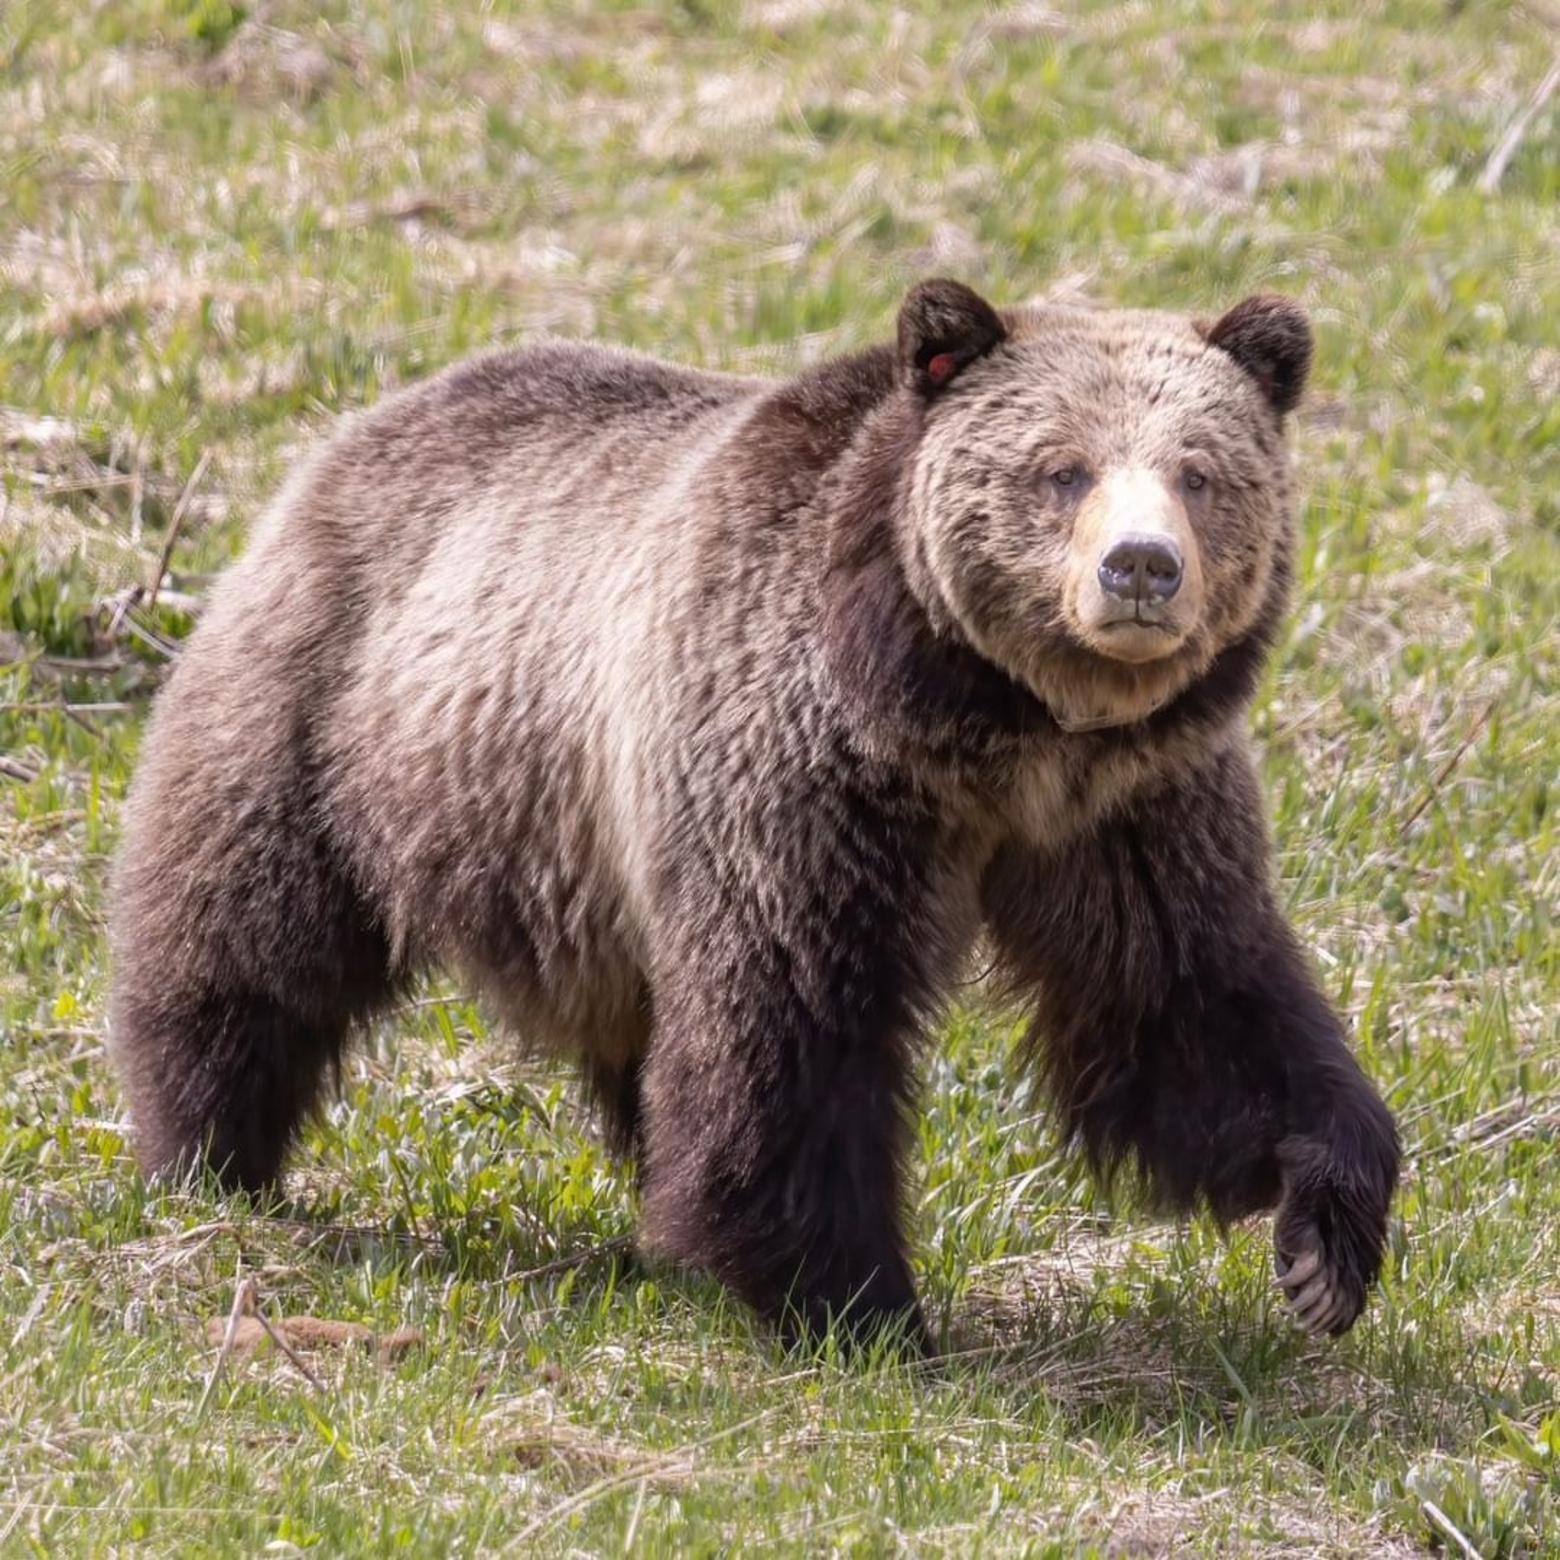 This summer, the U.S. Fish and Wildlife Service may hand over management of grizzly bears to the states: Wyoming, Montana and Idaho. Mike Bader says this is a dangerous decision for grizzlies. Here. a grizzly sow on the move in Yellowstone National Park. Photo by Ben Bluhm 